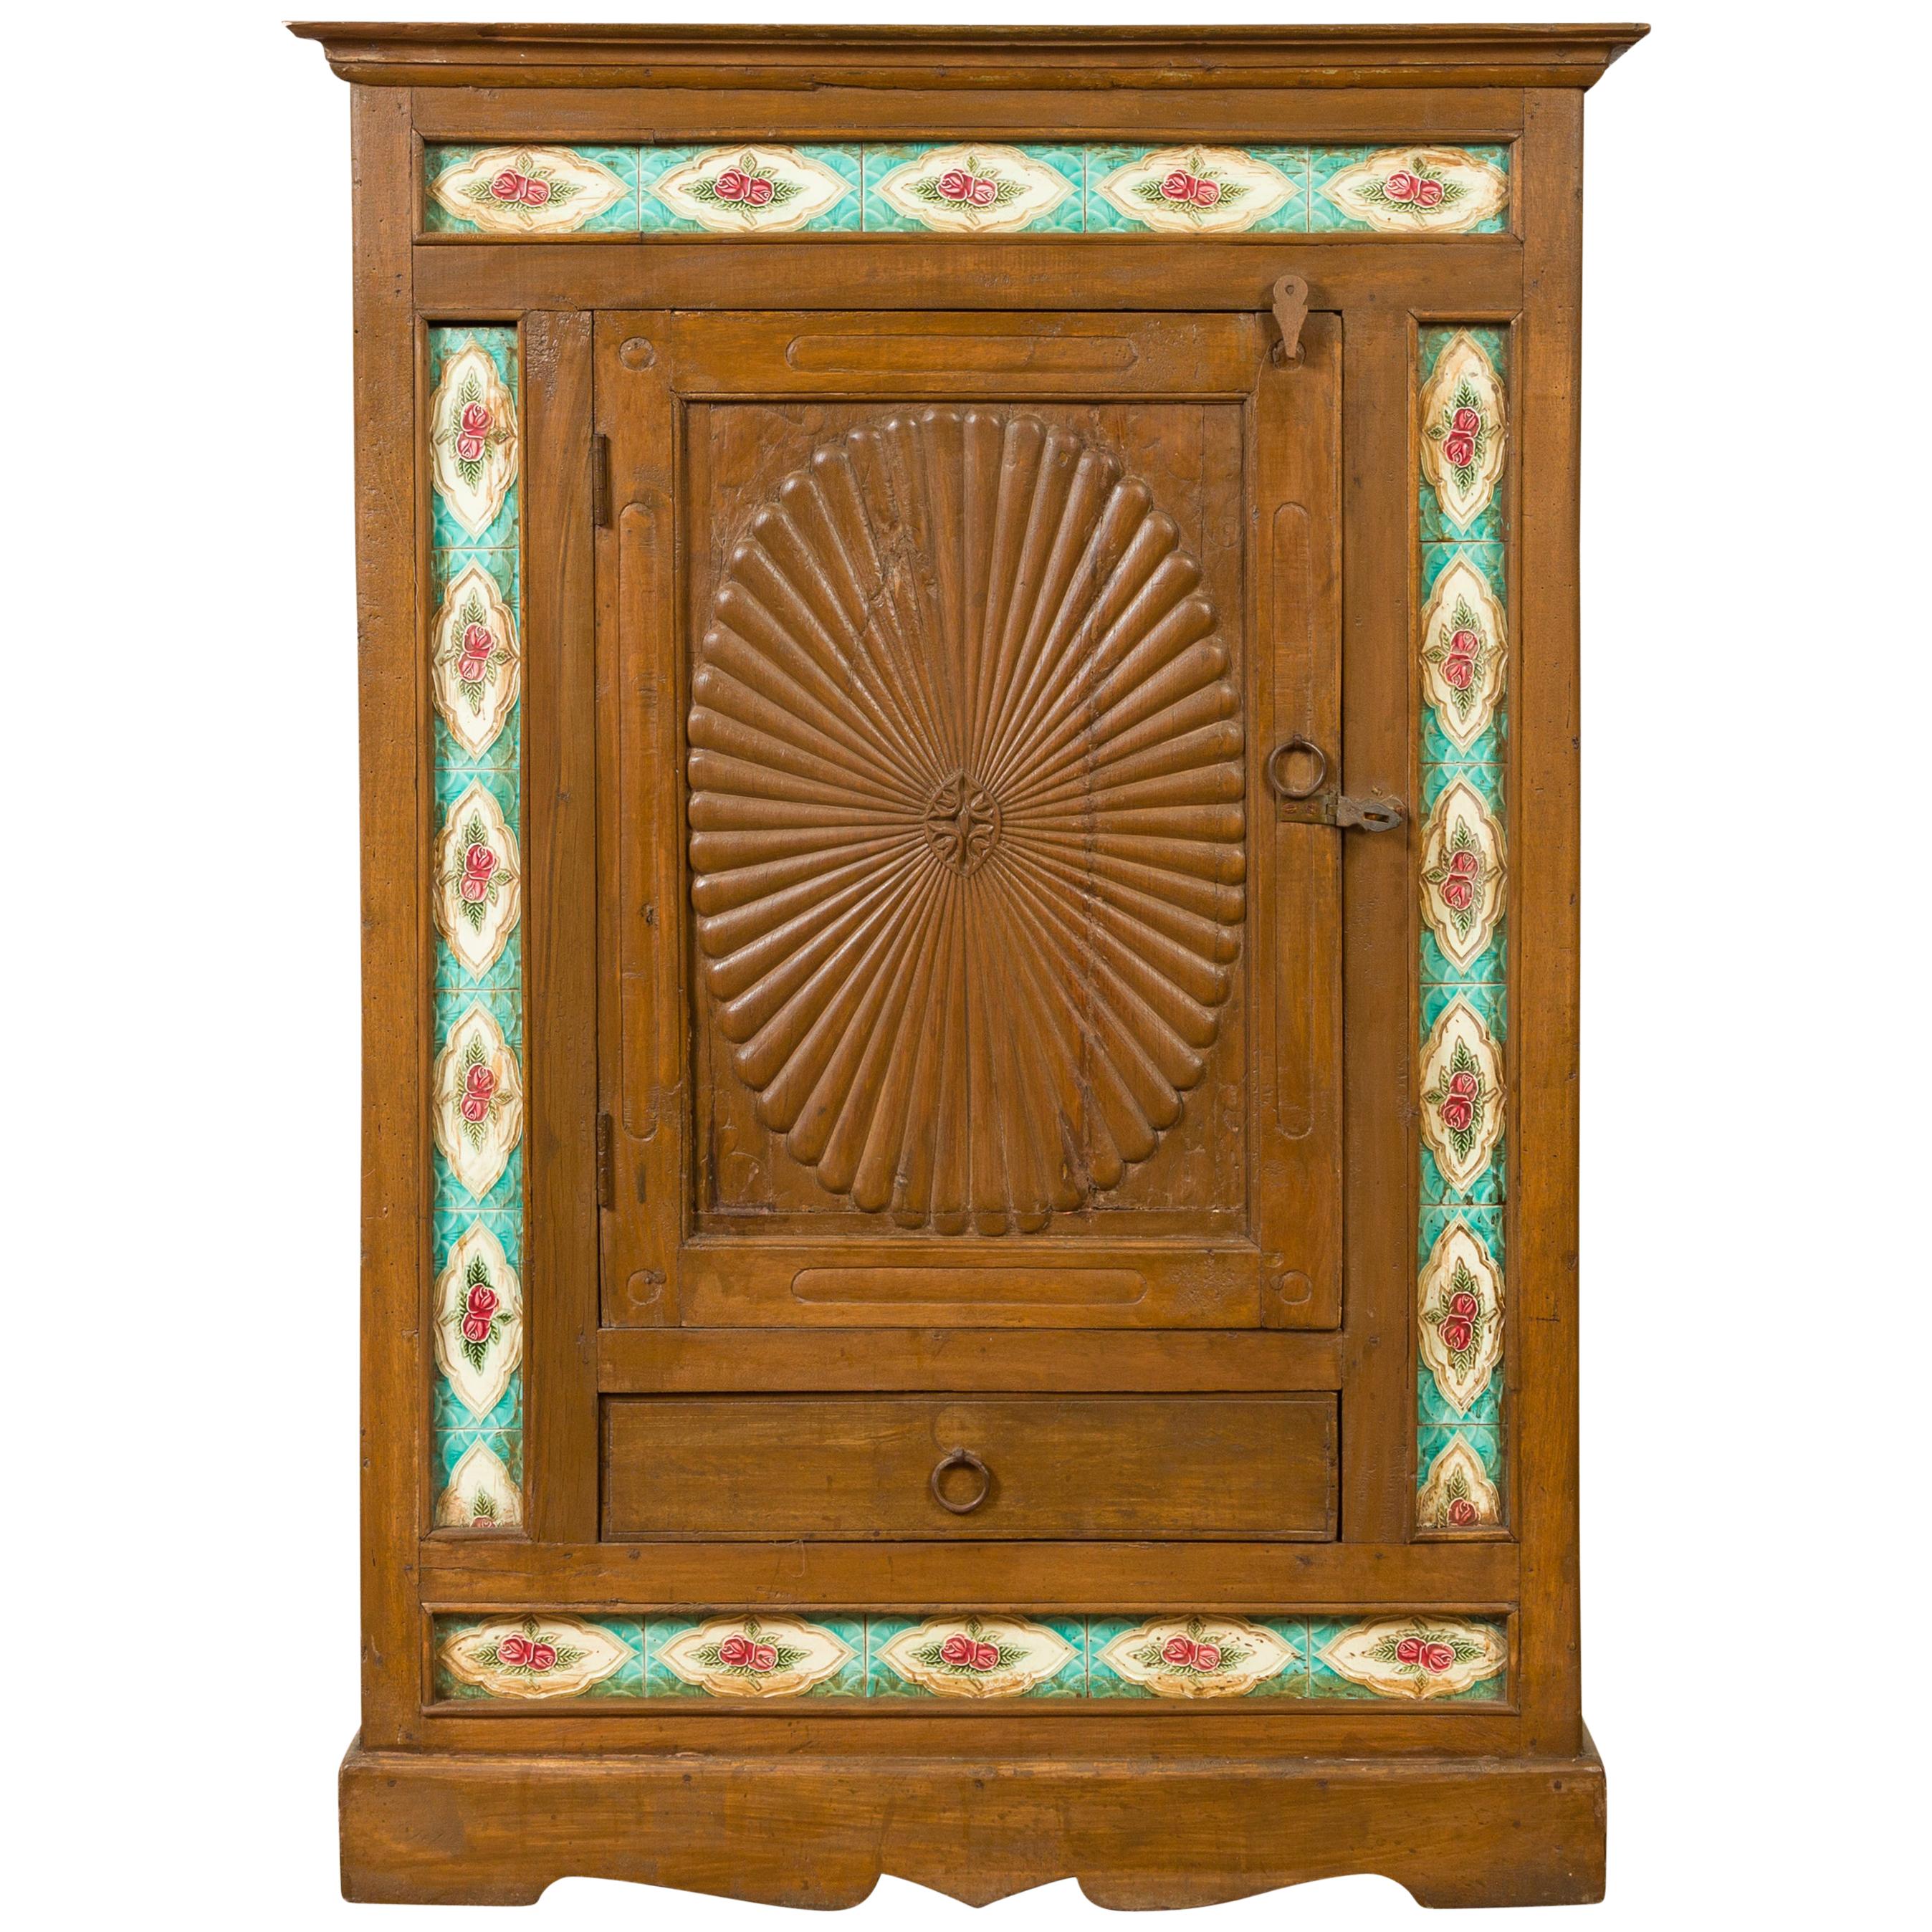 Indian Small Cabinet with Sunburst Design and Hand Painted Tiles with Rose Motif